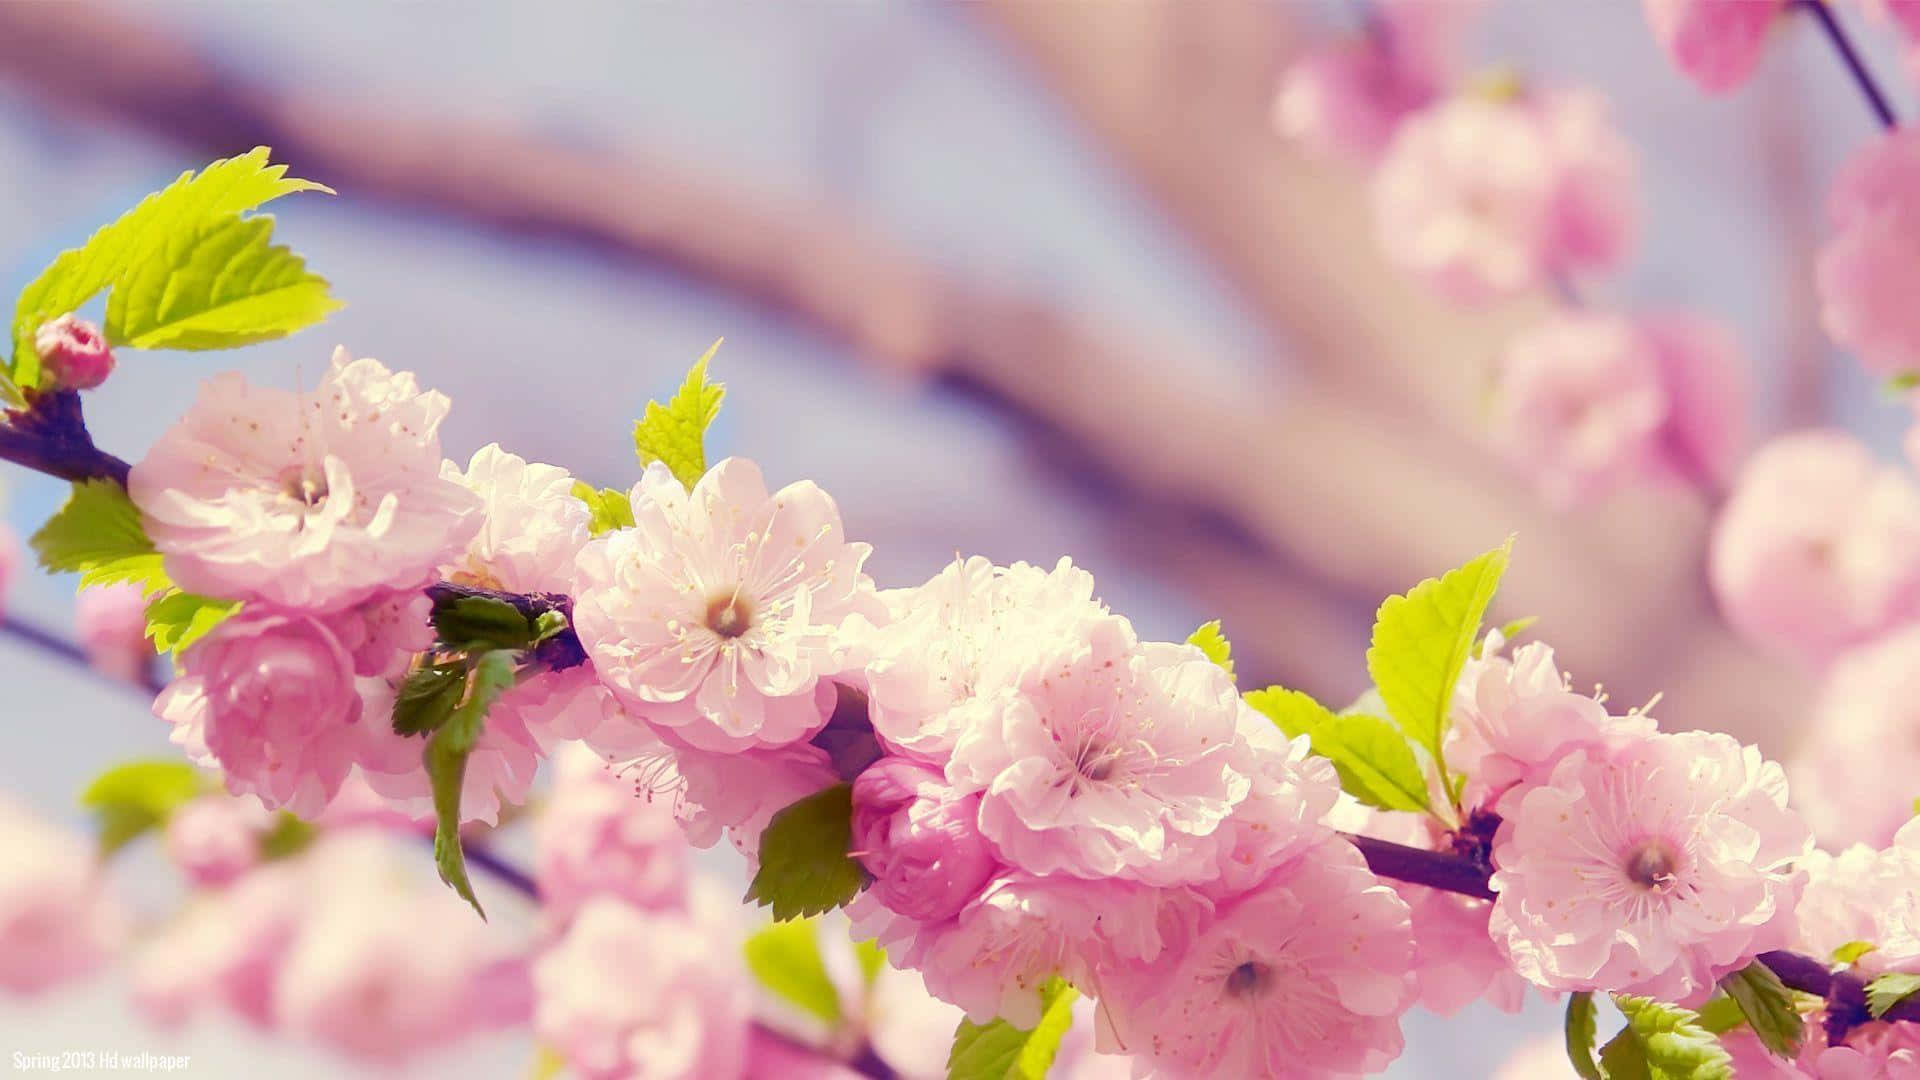 Enjoy the joy of Spring with these colorful flower blooms. Wallpaper